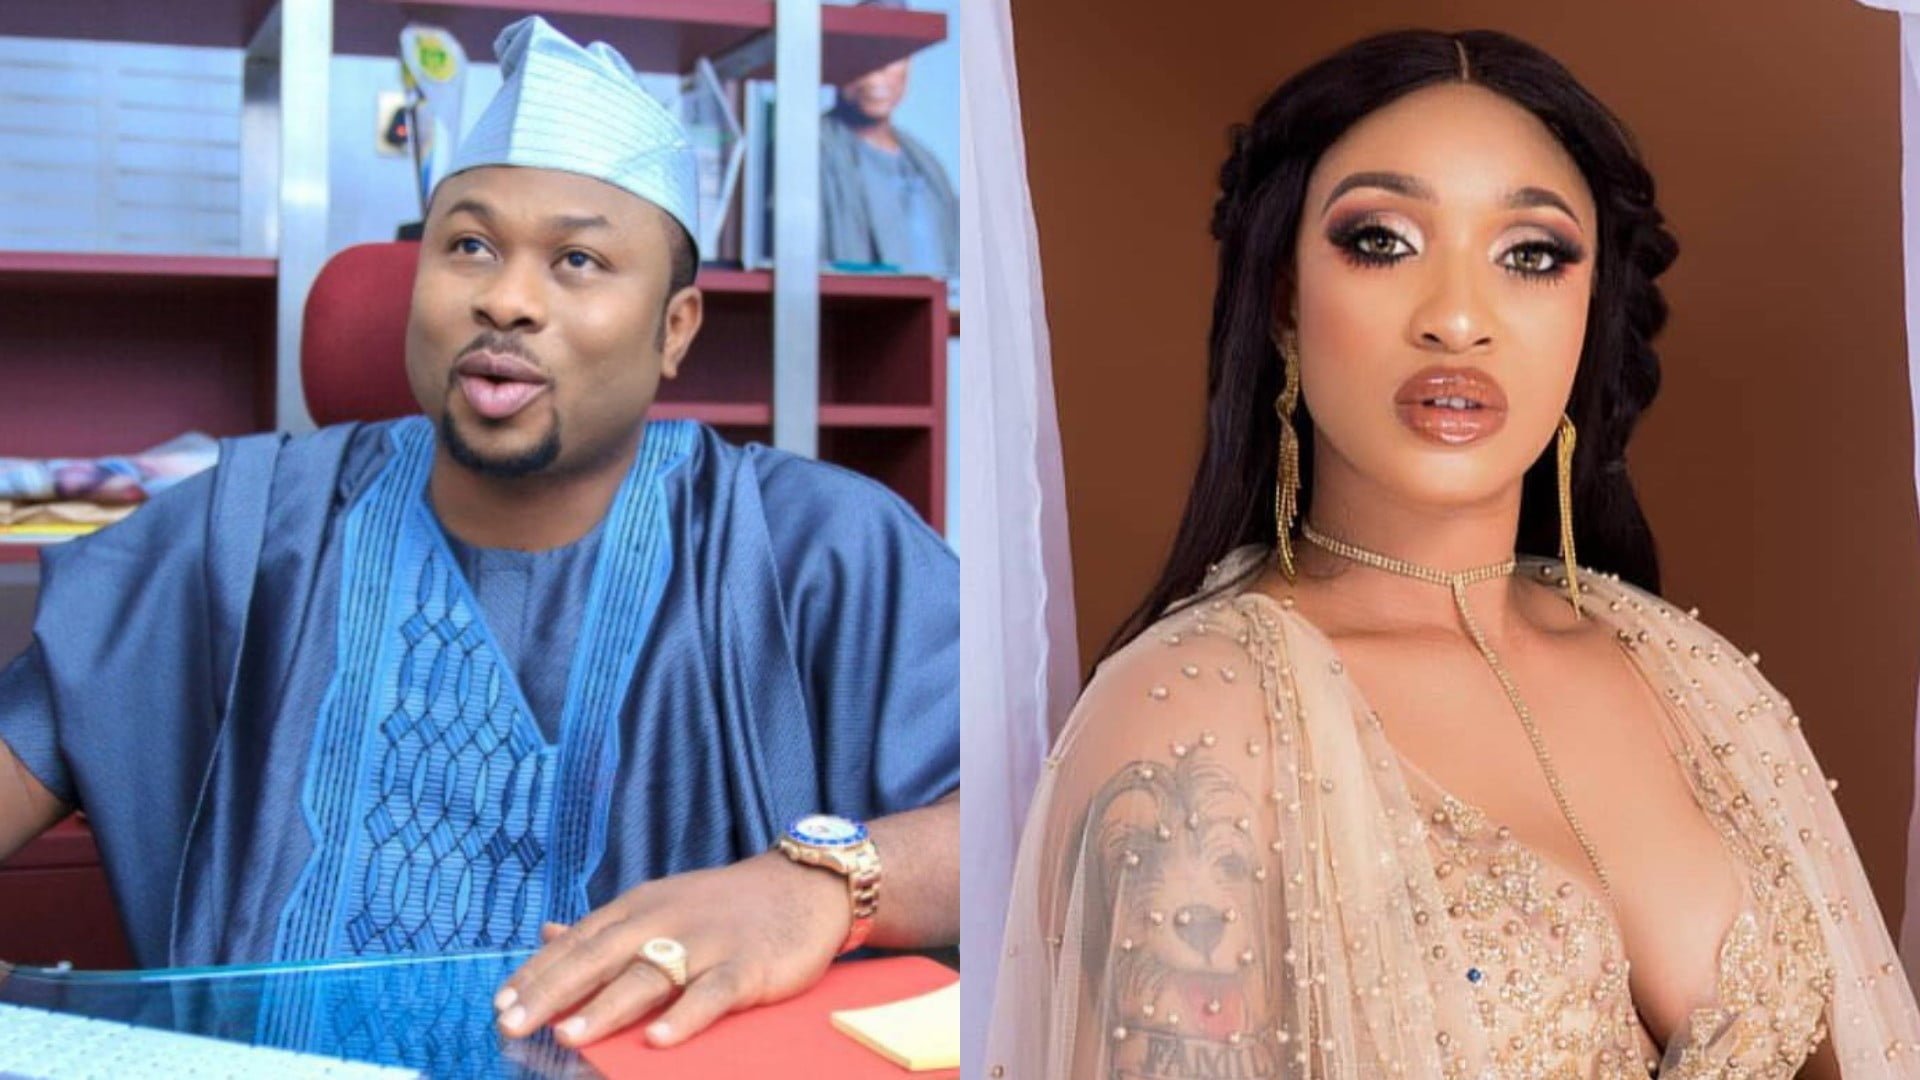 Olakunle Churchill shares purported audio recording of his ex, Tonto Dikeh, saying she would have poisoned him when they were still together